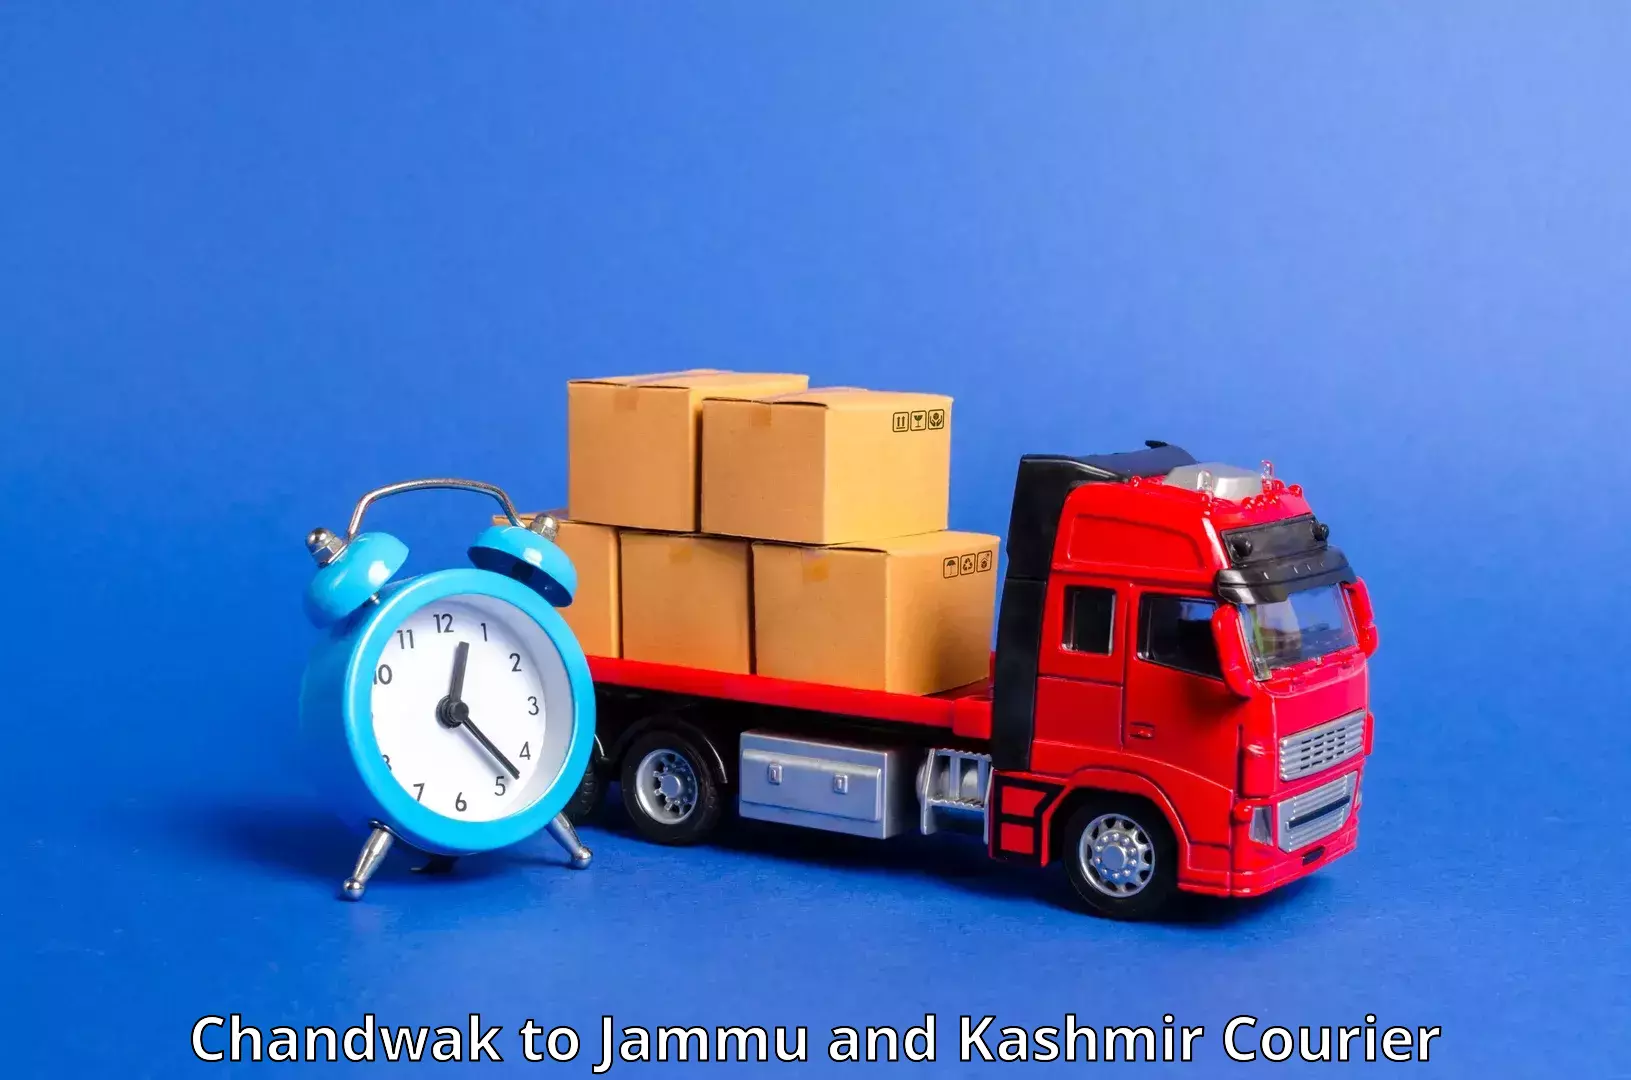 Air courier services in Chandwak to Jammu and Kashmir